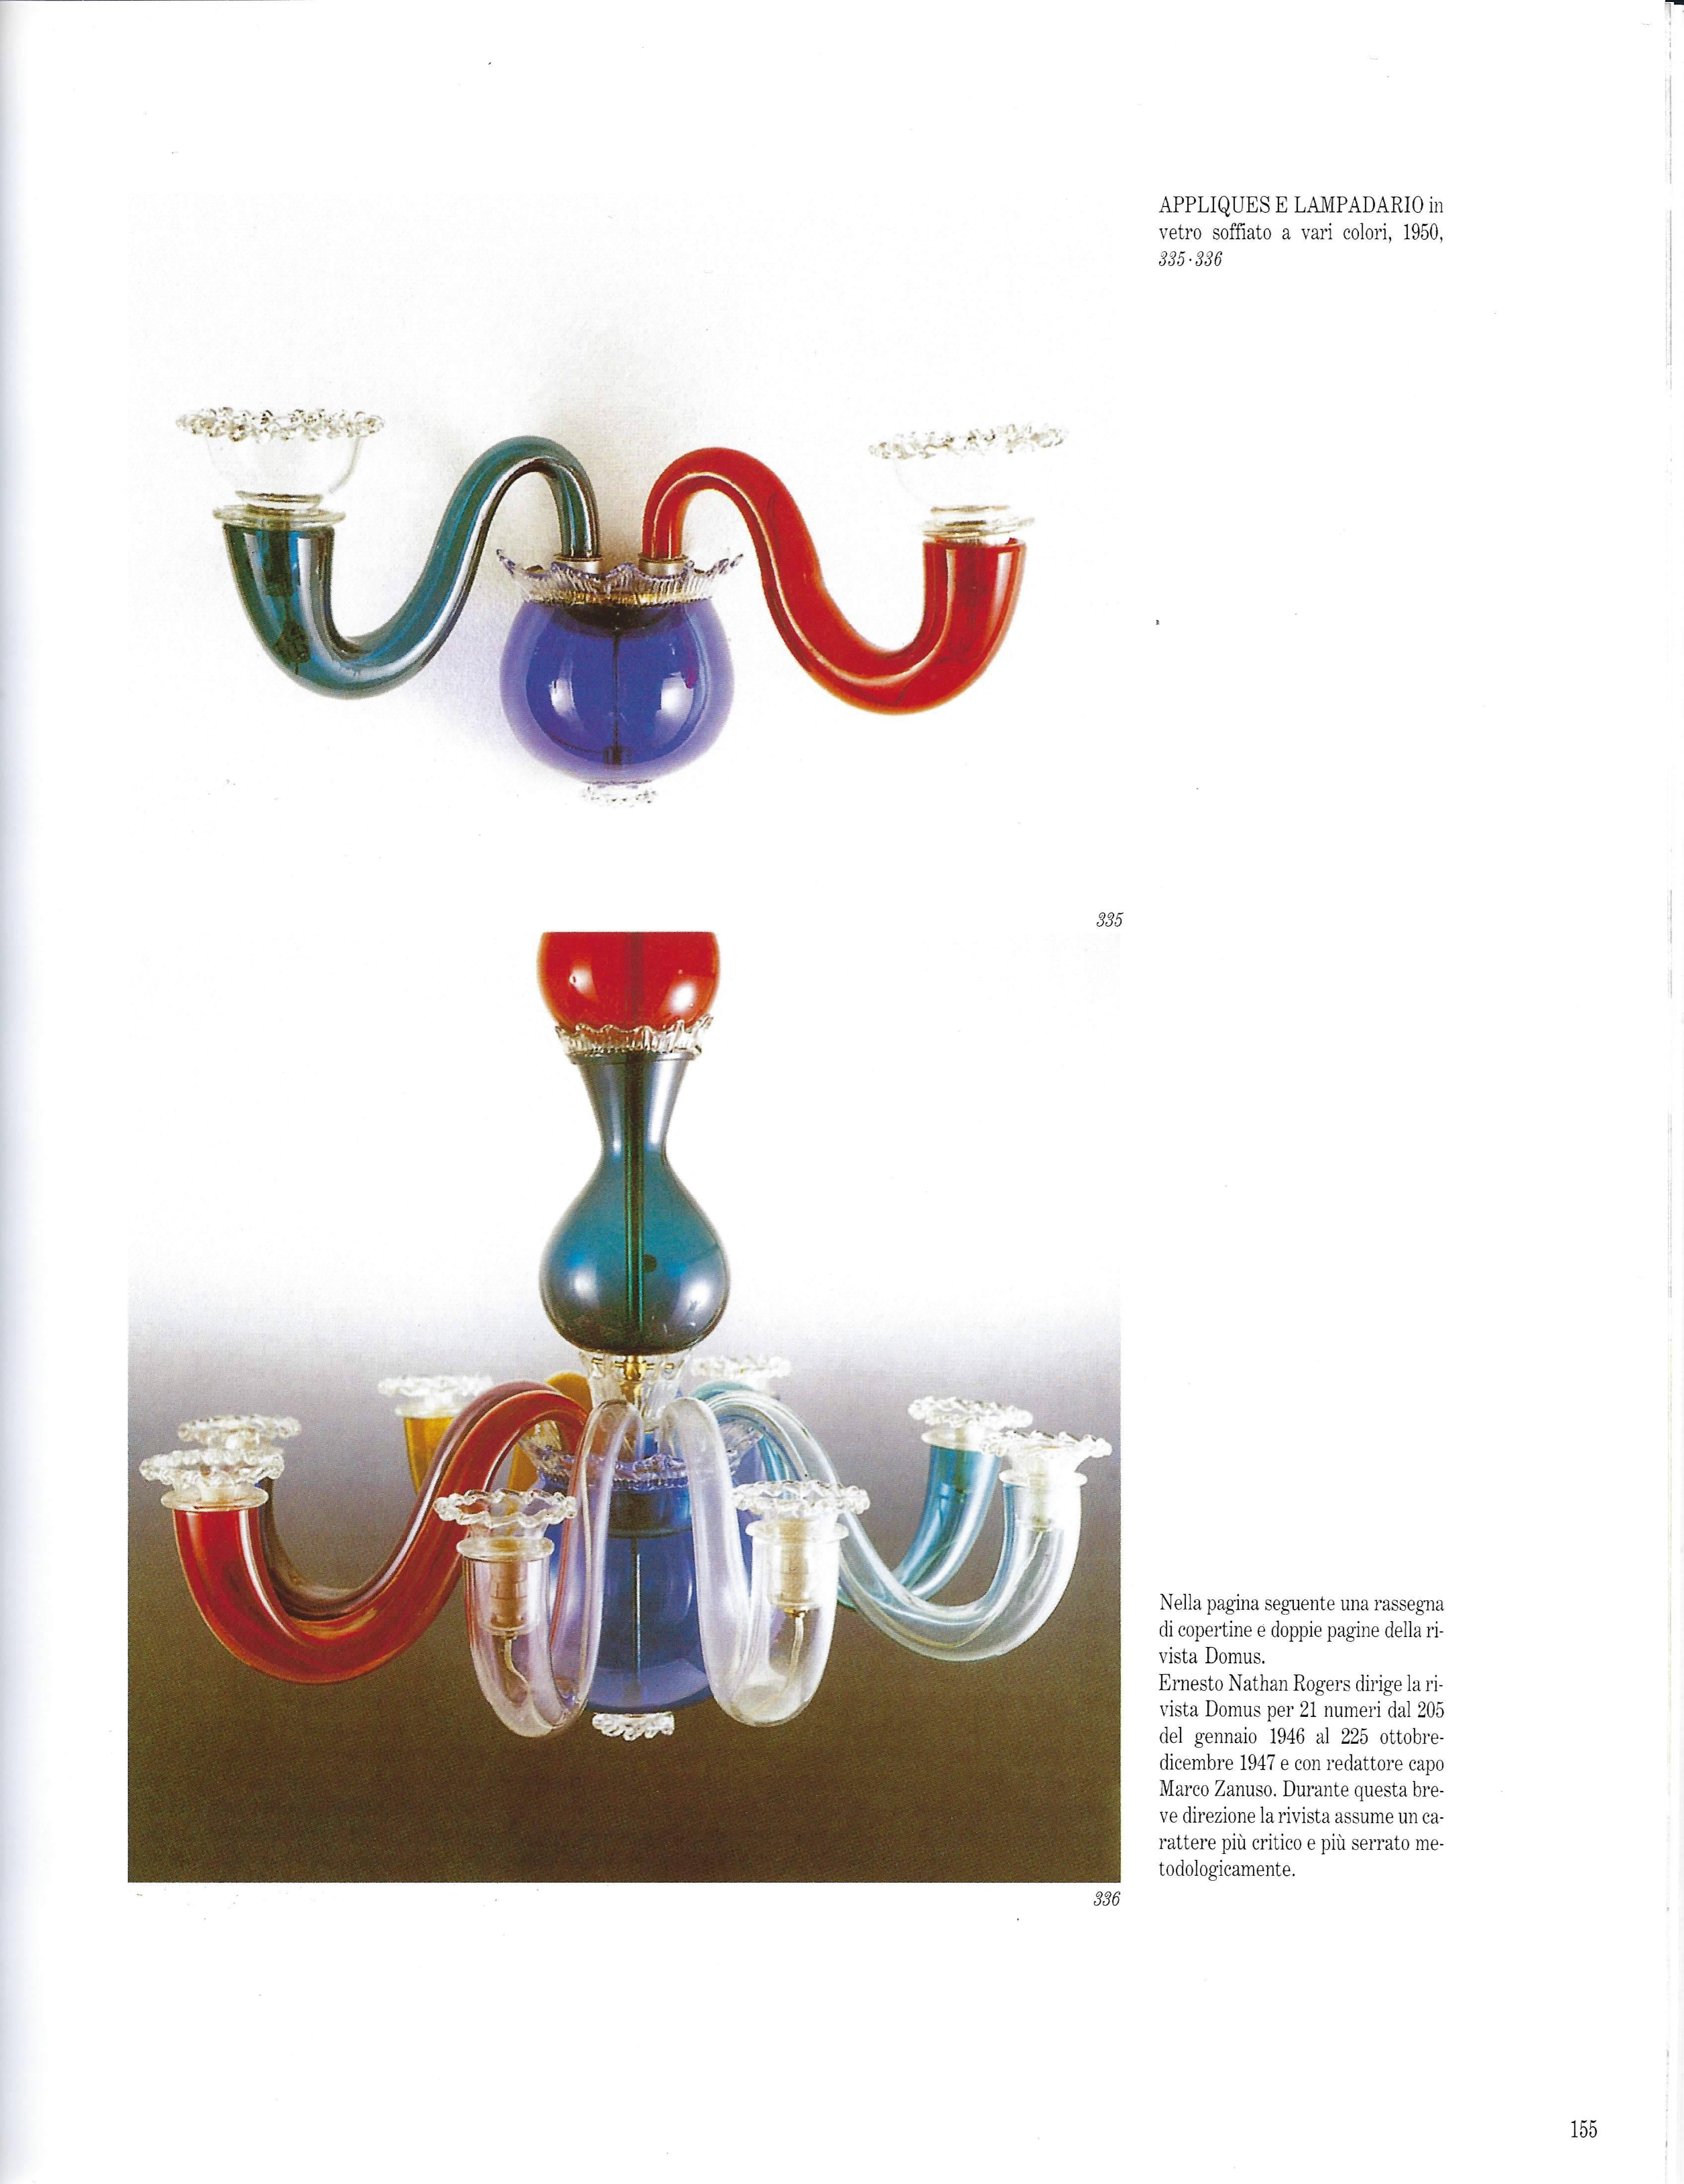 Handblown colored and clear Murano glass with nickel-plated sockets. Rewired to U.S. standards.

Sold with Certificate of Authenticity from Gio Ponti archives.

Literature:
Ugo La Pietra, Gio Ponti, Milan, 2009, p. 155, no. 335 for similar model